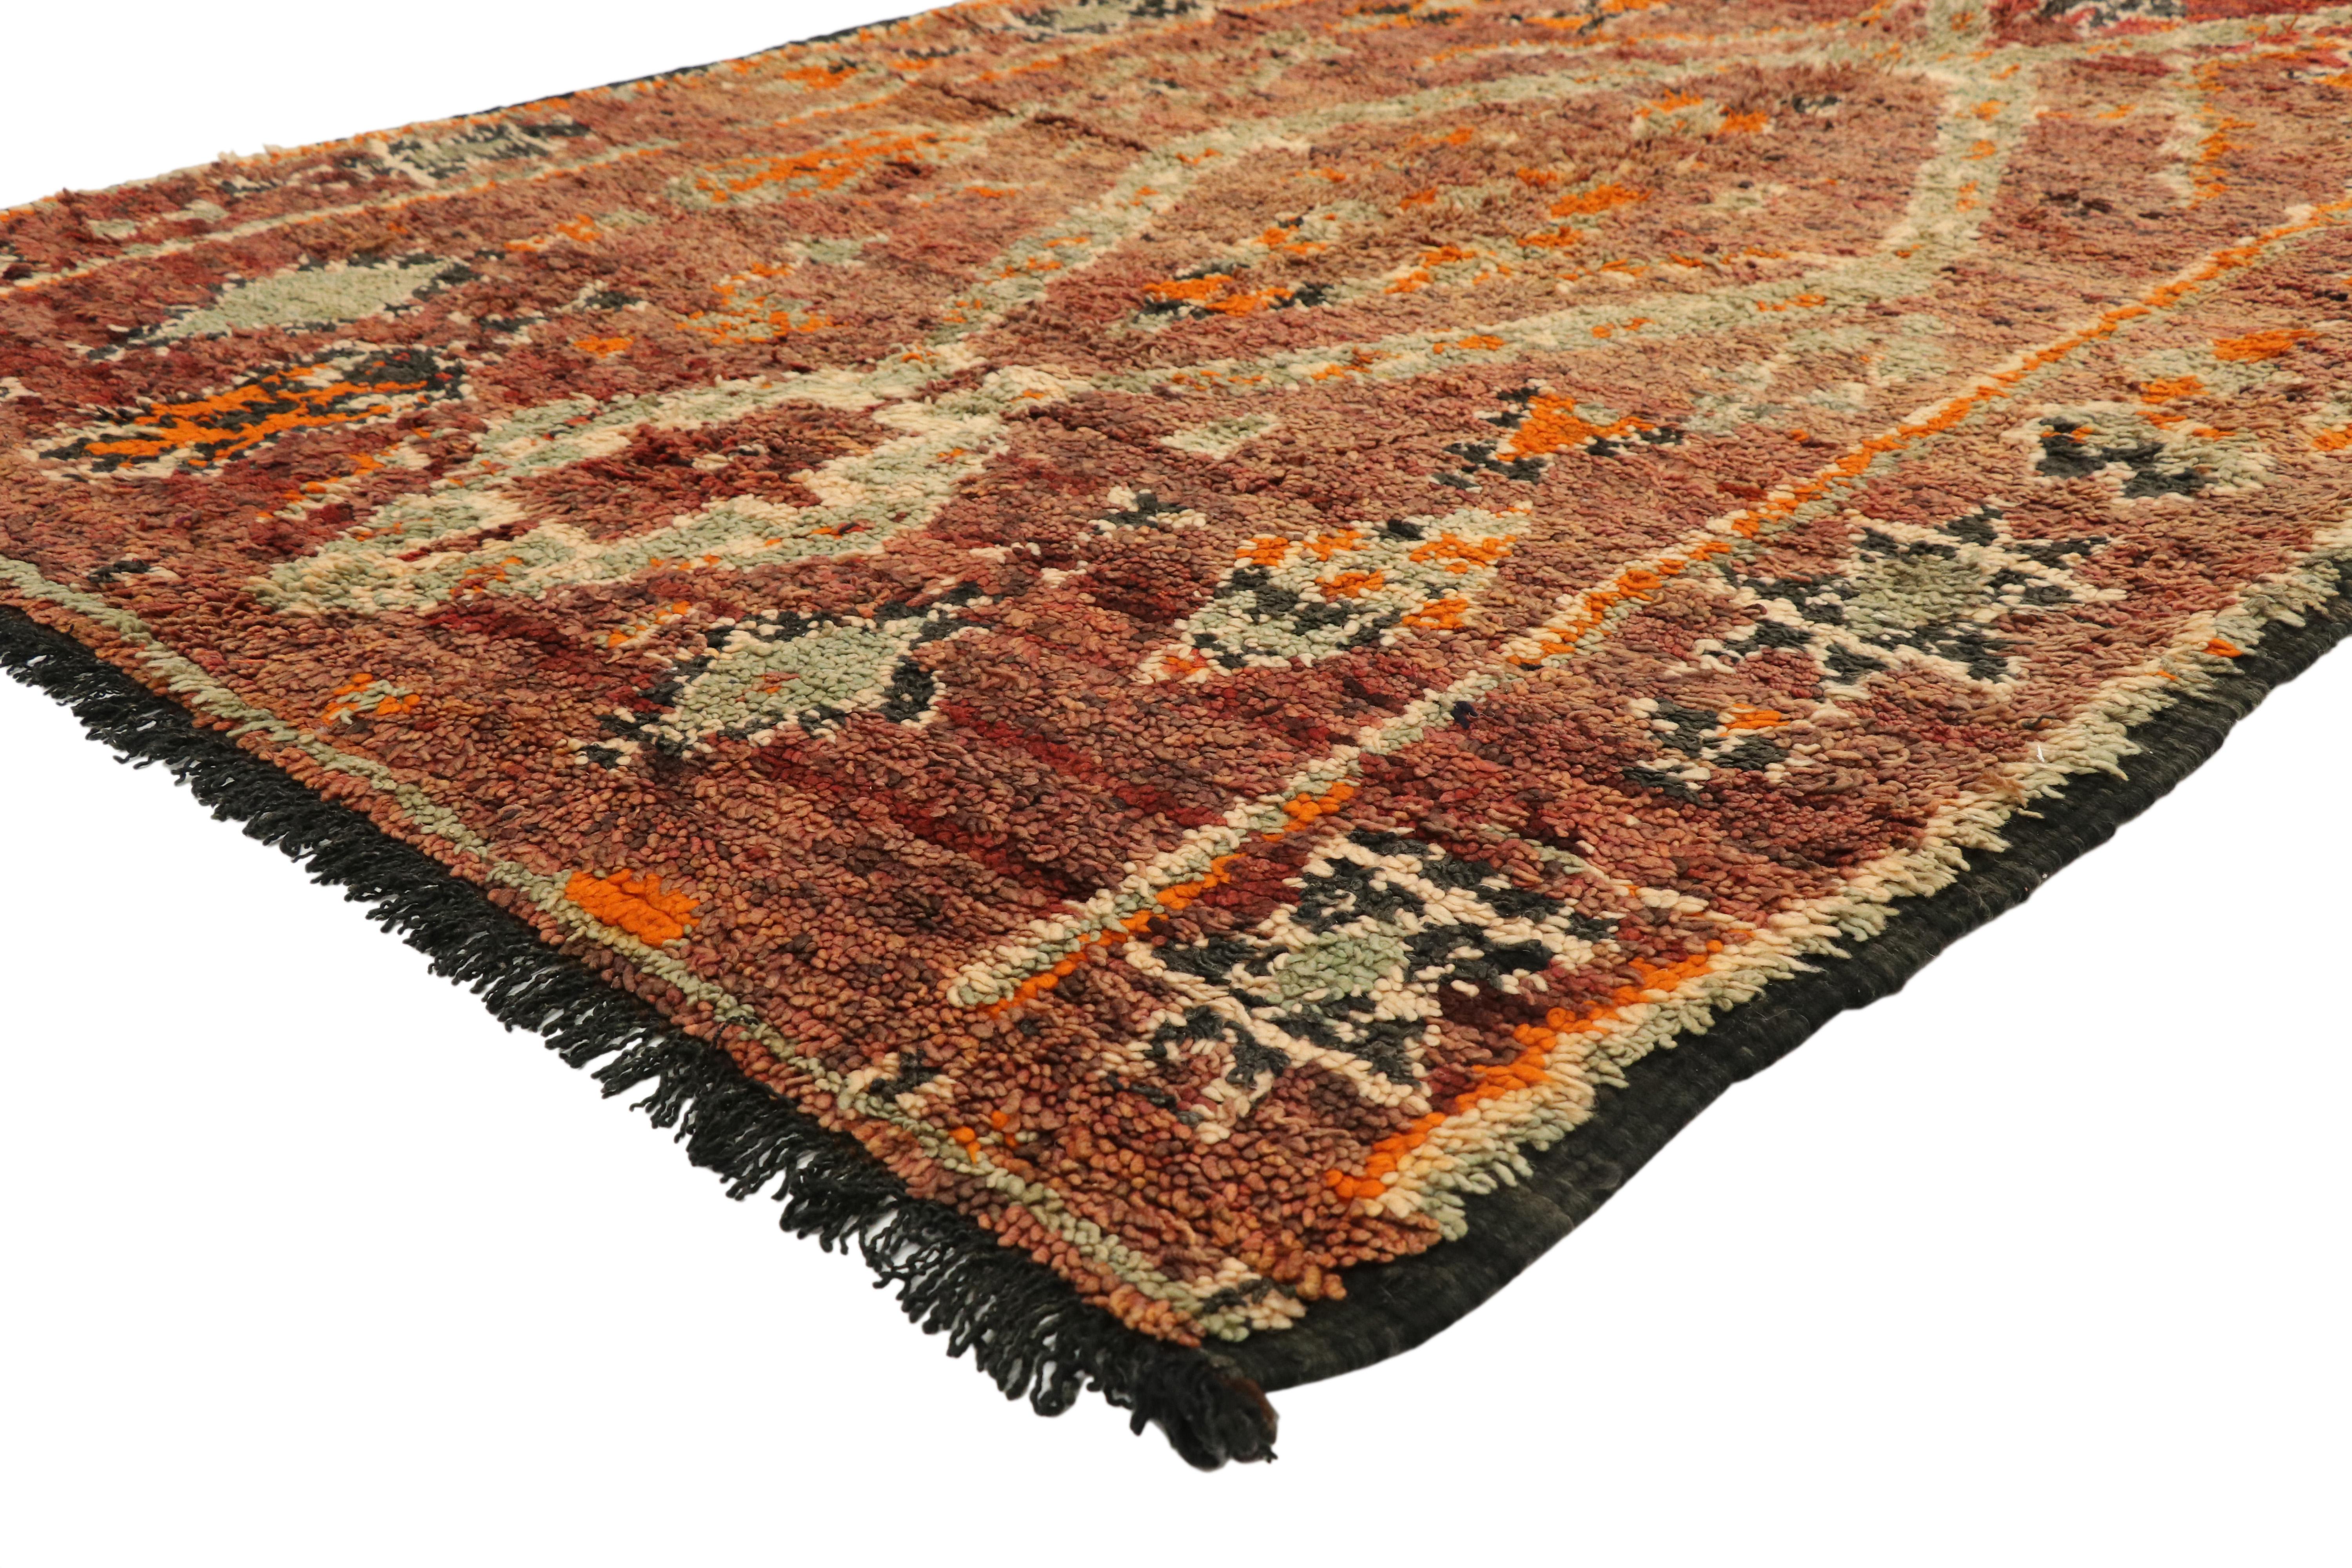 20316, vintage Berber Moroccan rug with Mid-Century Modern style. This hand knotted wool vintage Zayane Moroccan rug features lozenges, X-shapes, fused triangles, zigzag lines, snakes, and burdock symbols, which represents femininity, protection,